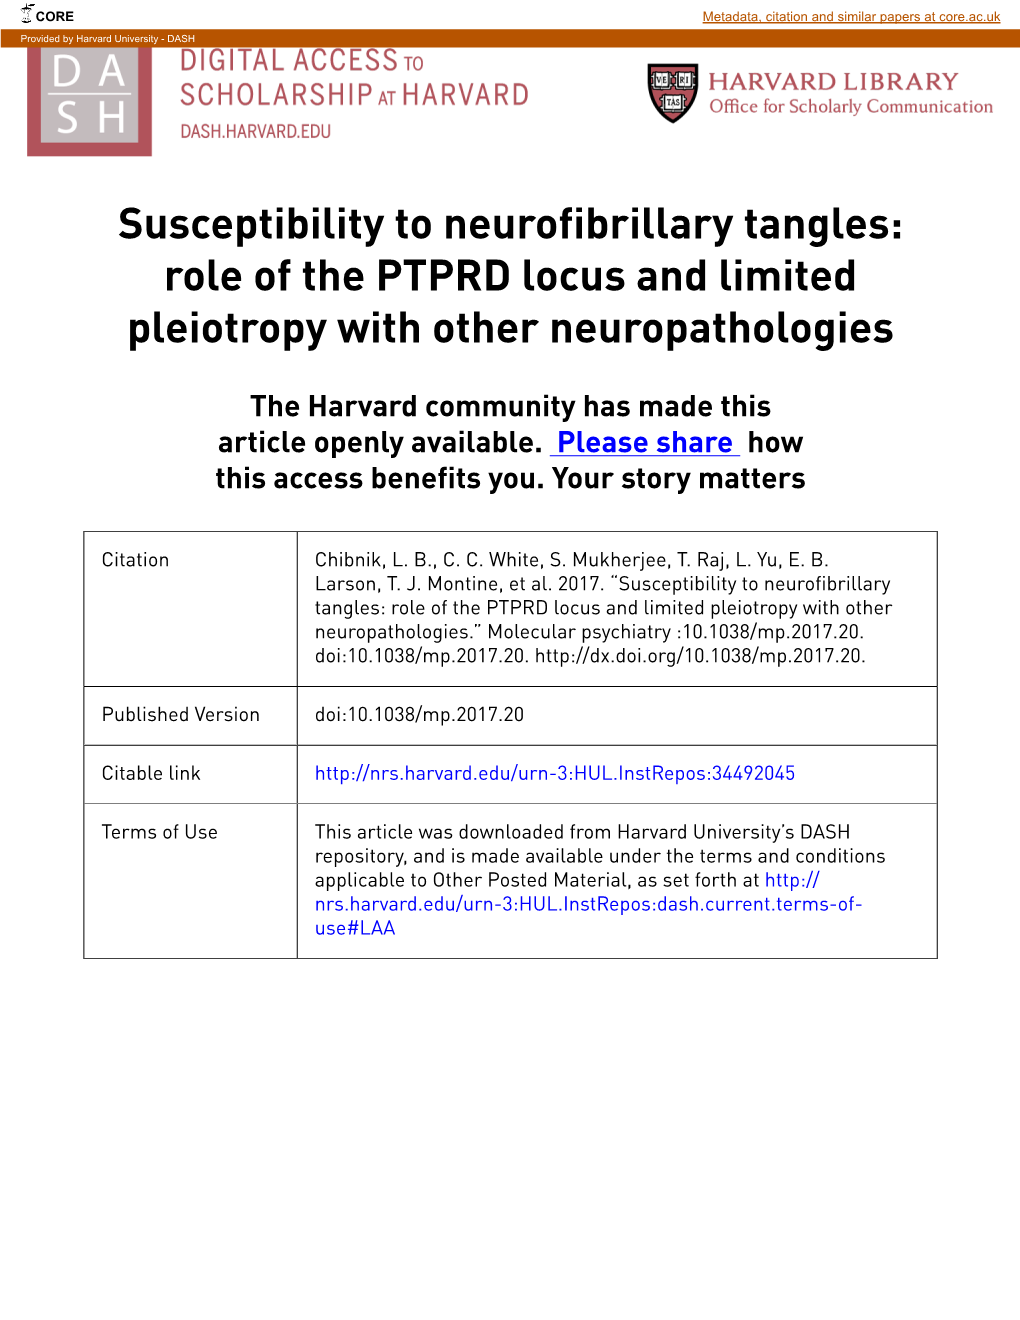 Role of the PTPRD Locus and Limited Pleiotropy with Other Neuropathologies